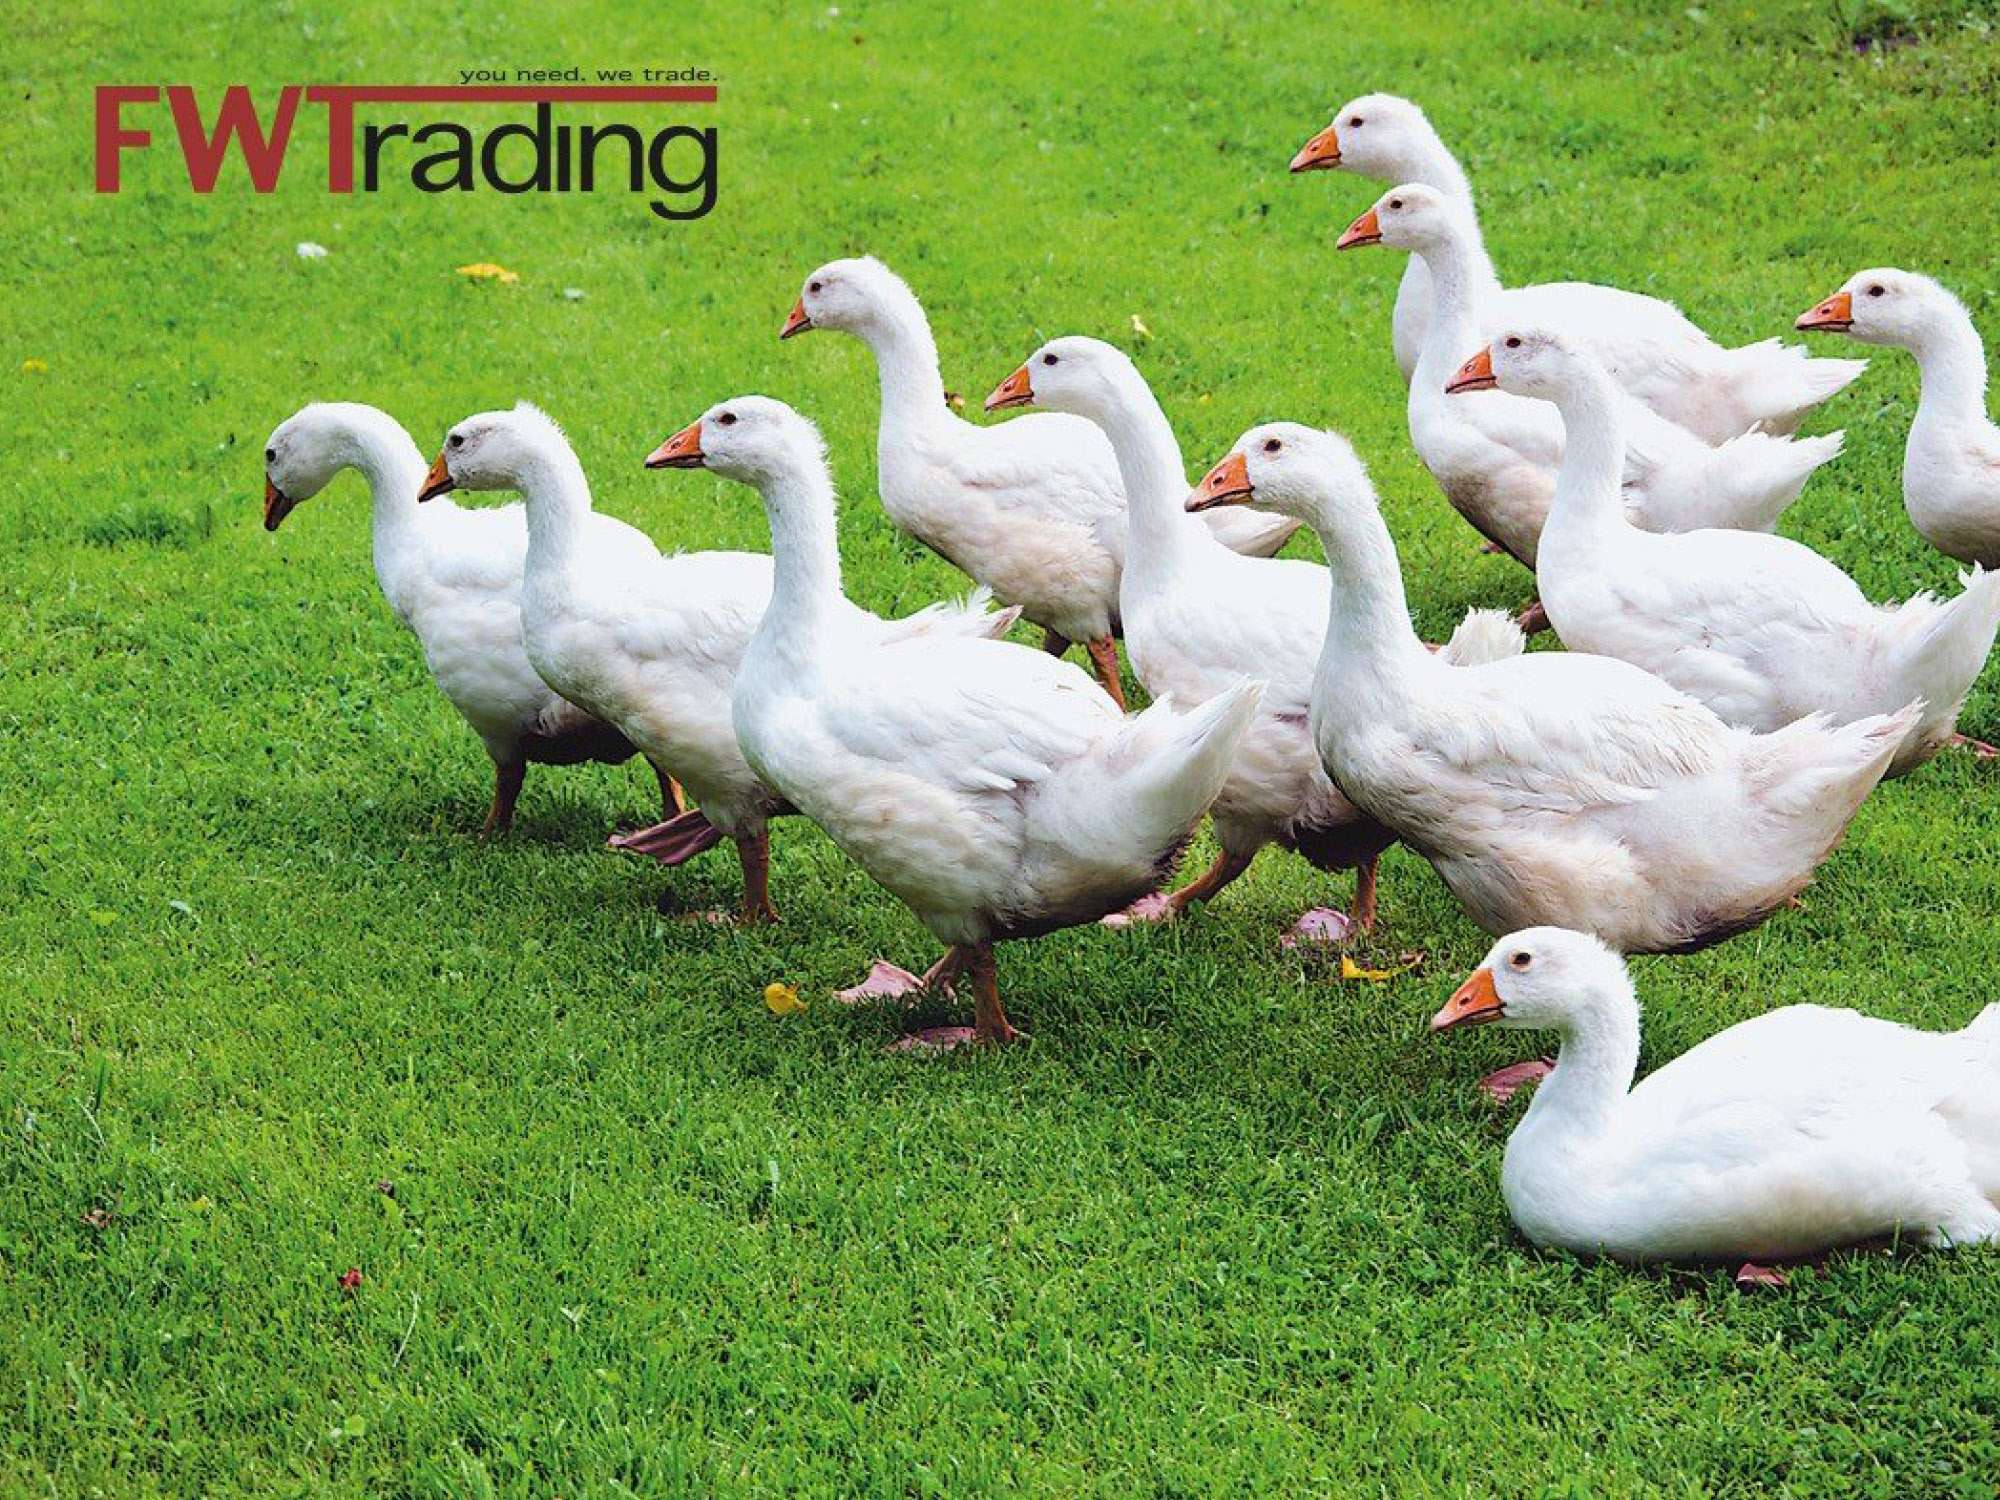 FW TRADING - The trading specialist with the highest quality standards